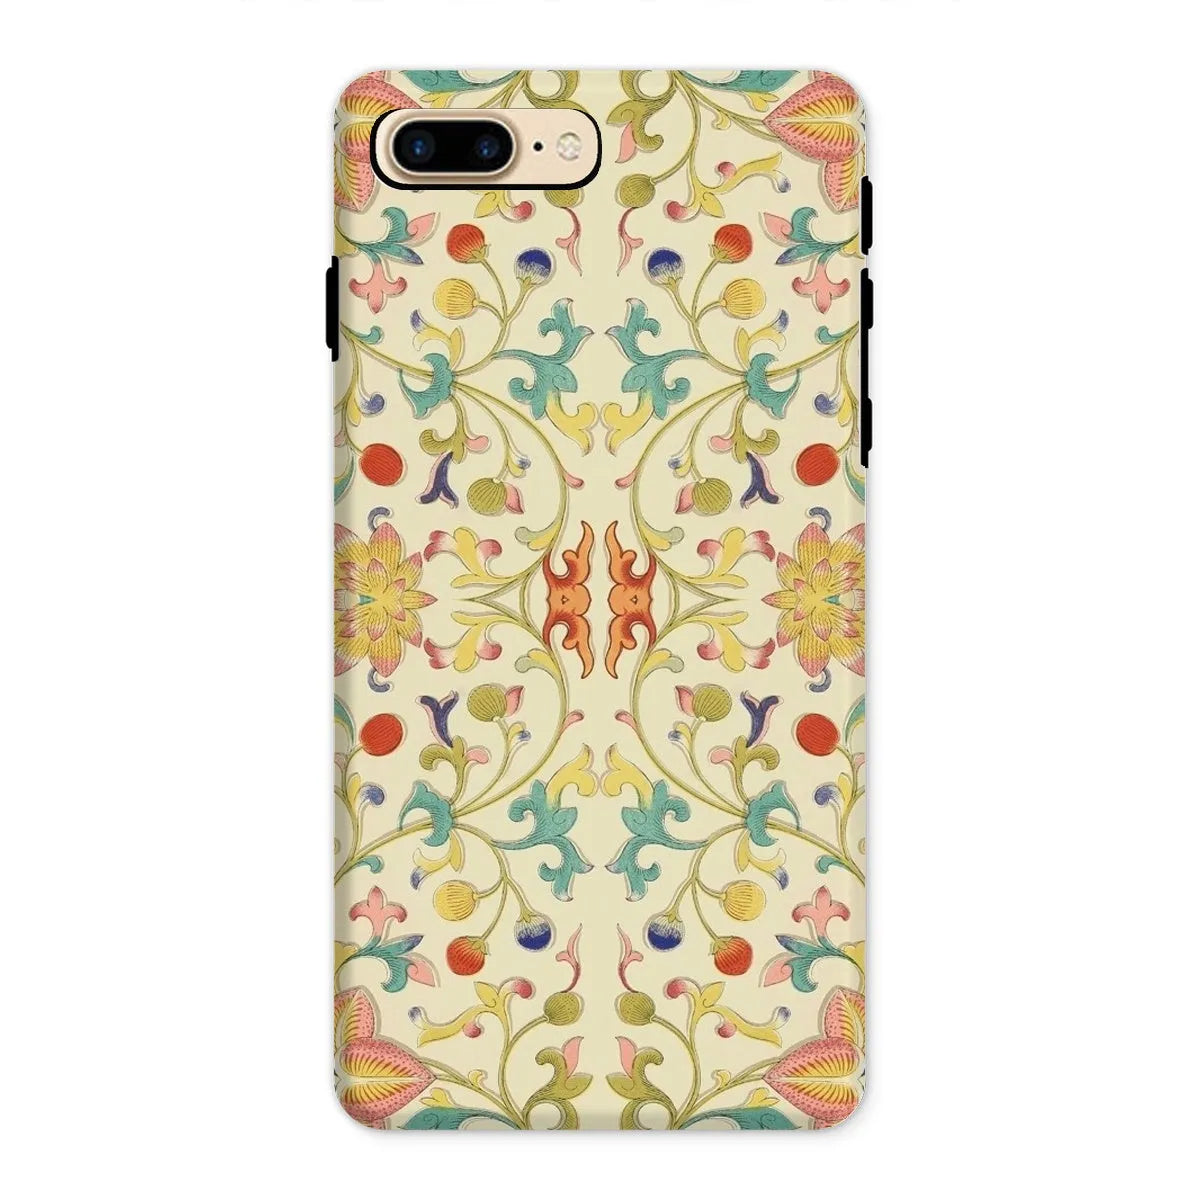 Over The Rainbow - Chinoiserie Pattern Art Phone Case - Iphone 8 Plus / Matte - Mobile Phone Cases - Aesthetic Art